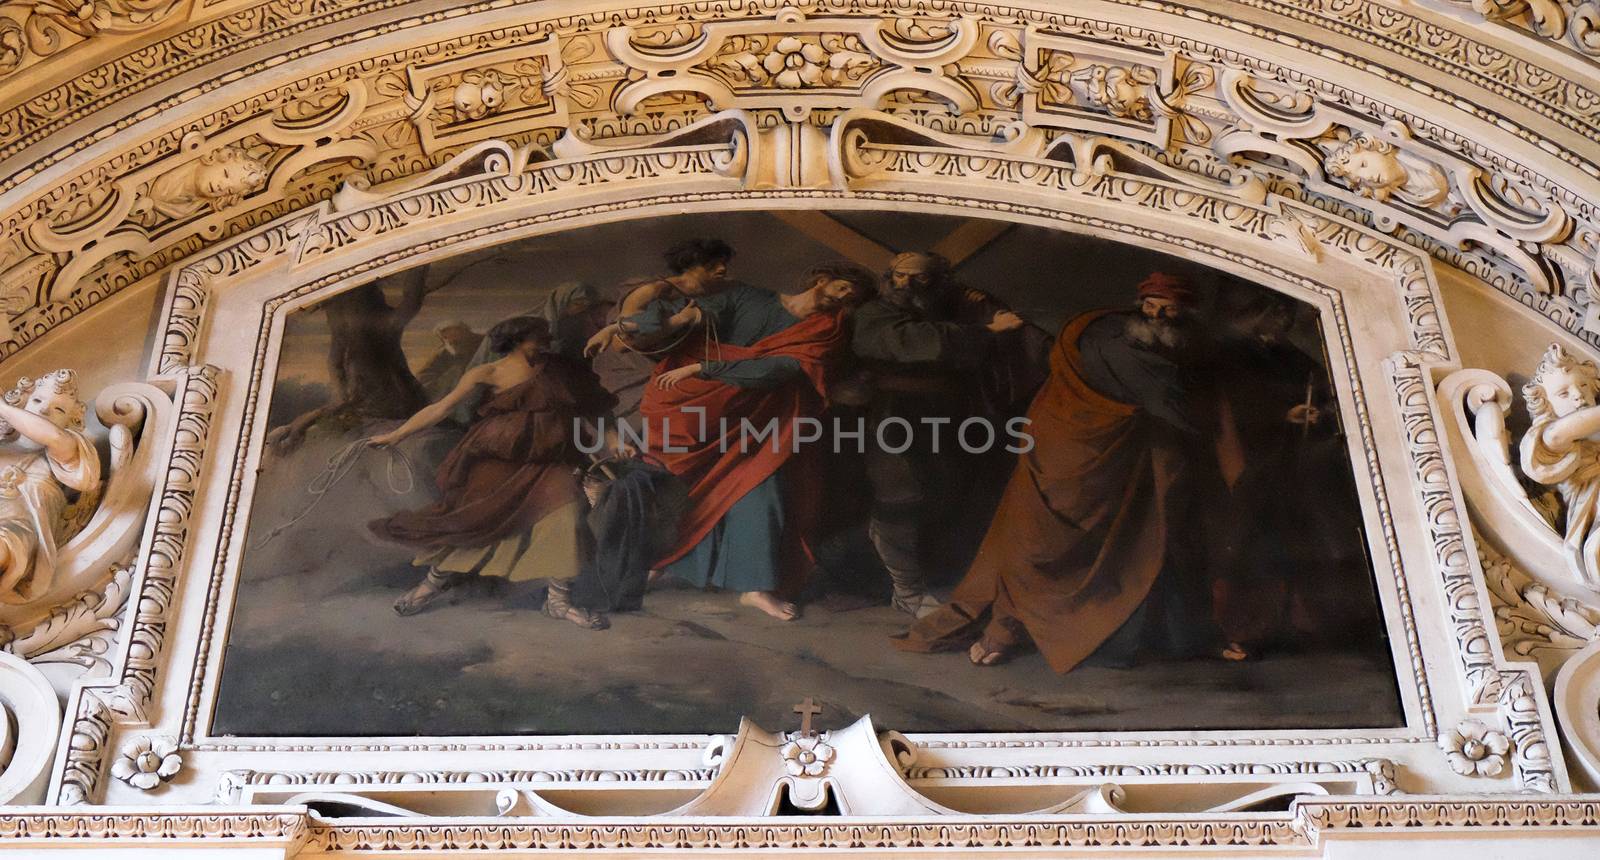 5th Stations of the Cross, Simon of Cyrene carries the cross, fragment of the dome in Salzburg Cathedral, Austria.